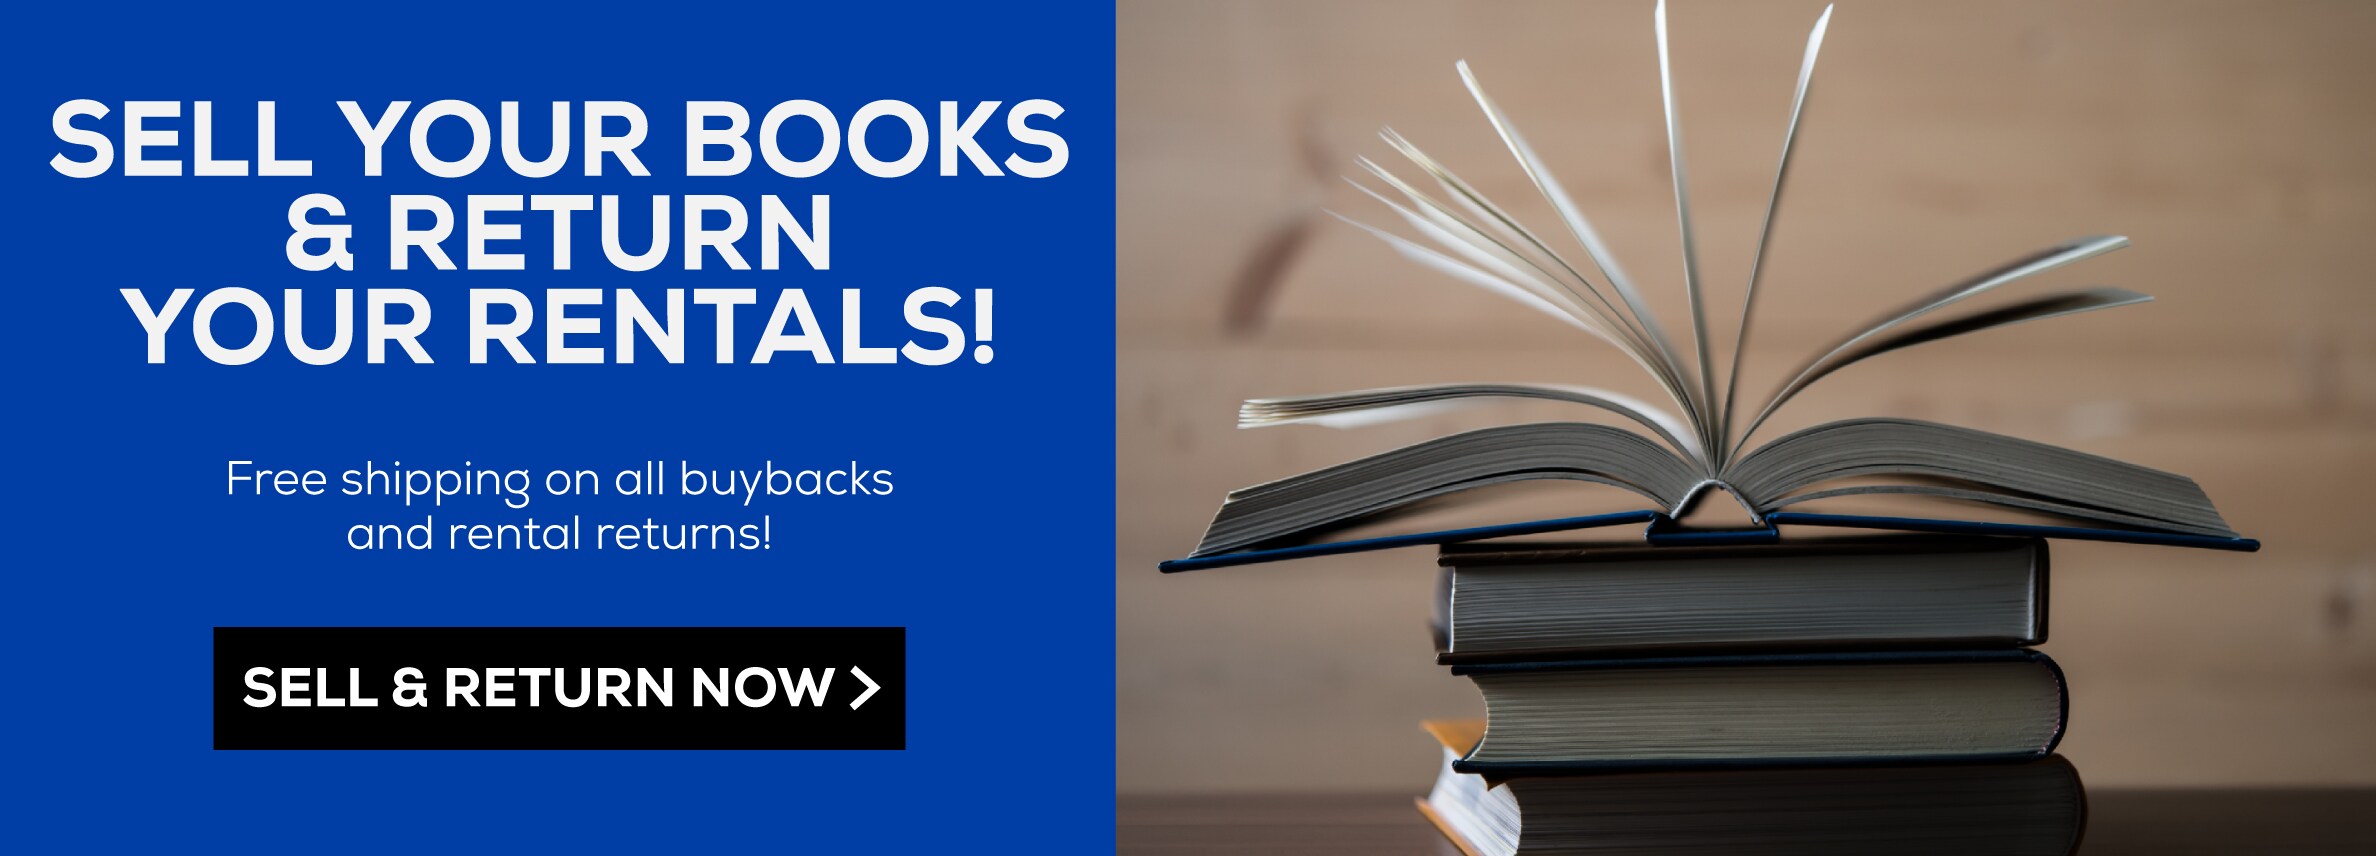 Sell your textbooks and return your rentals. Free shipping on all buybacks and rental returns. Sell and return now